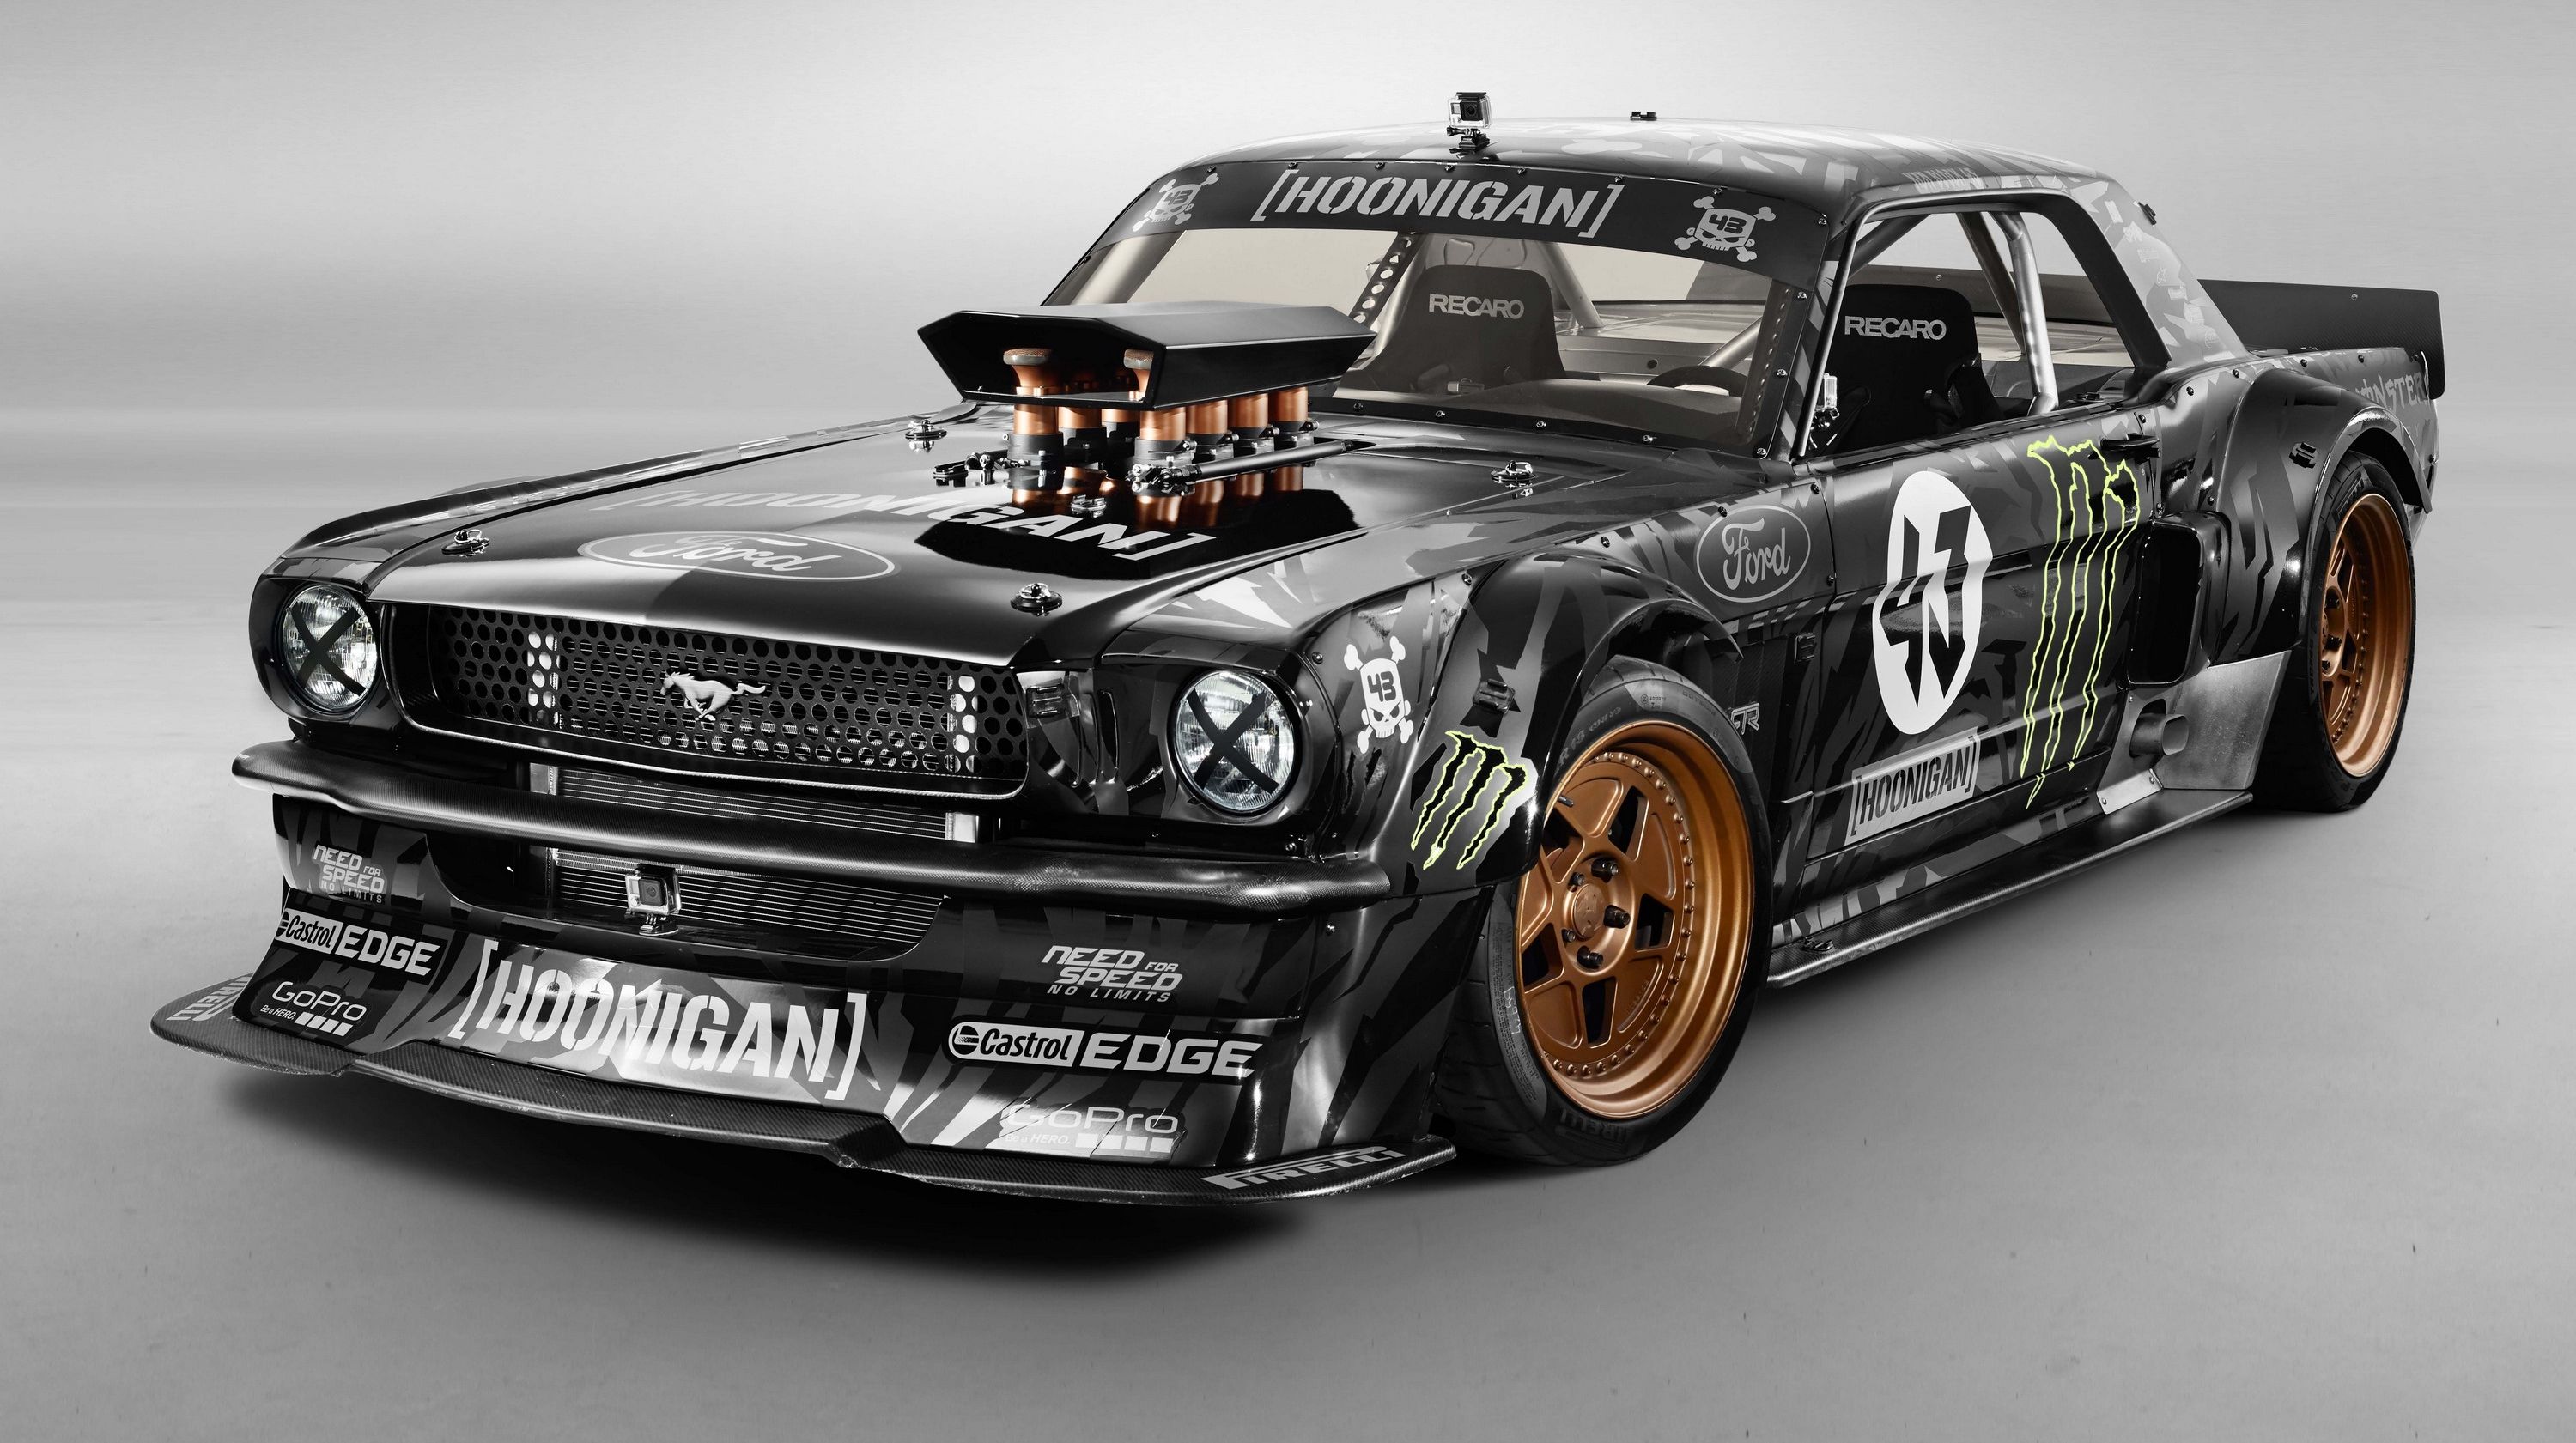  I think Ken Block has officially gone nuts, and this is the glorious monster that his insanity spawned. 